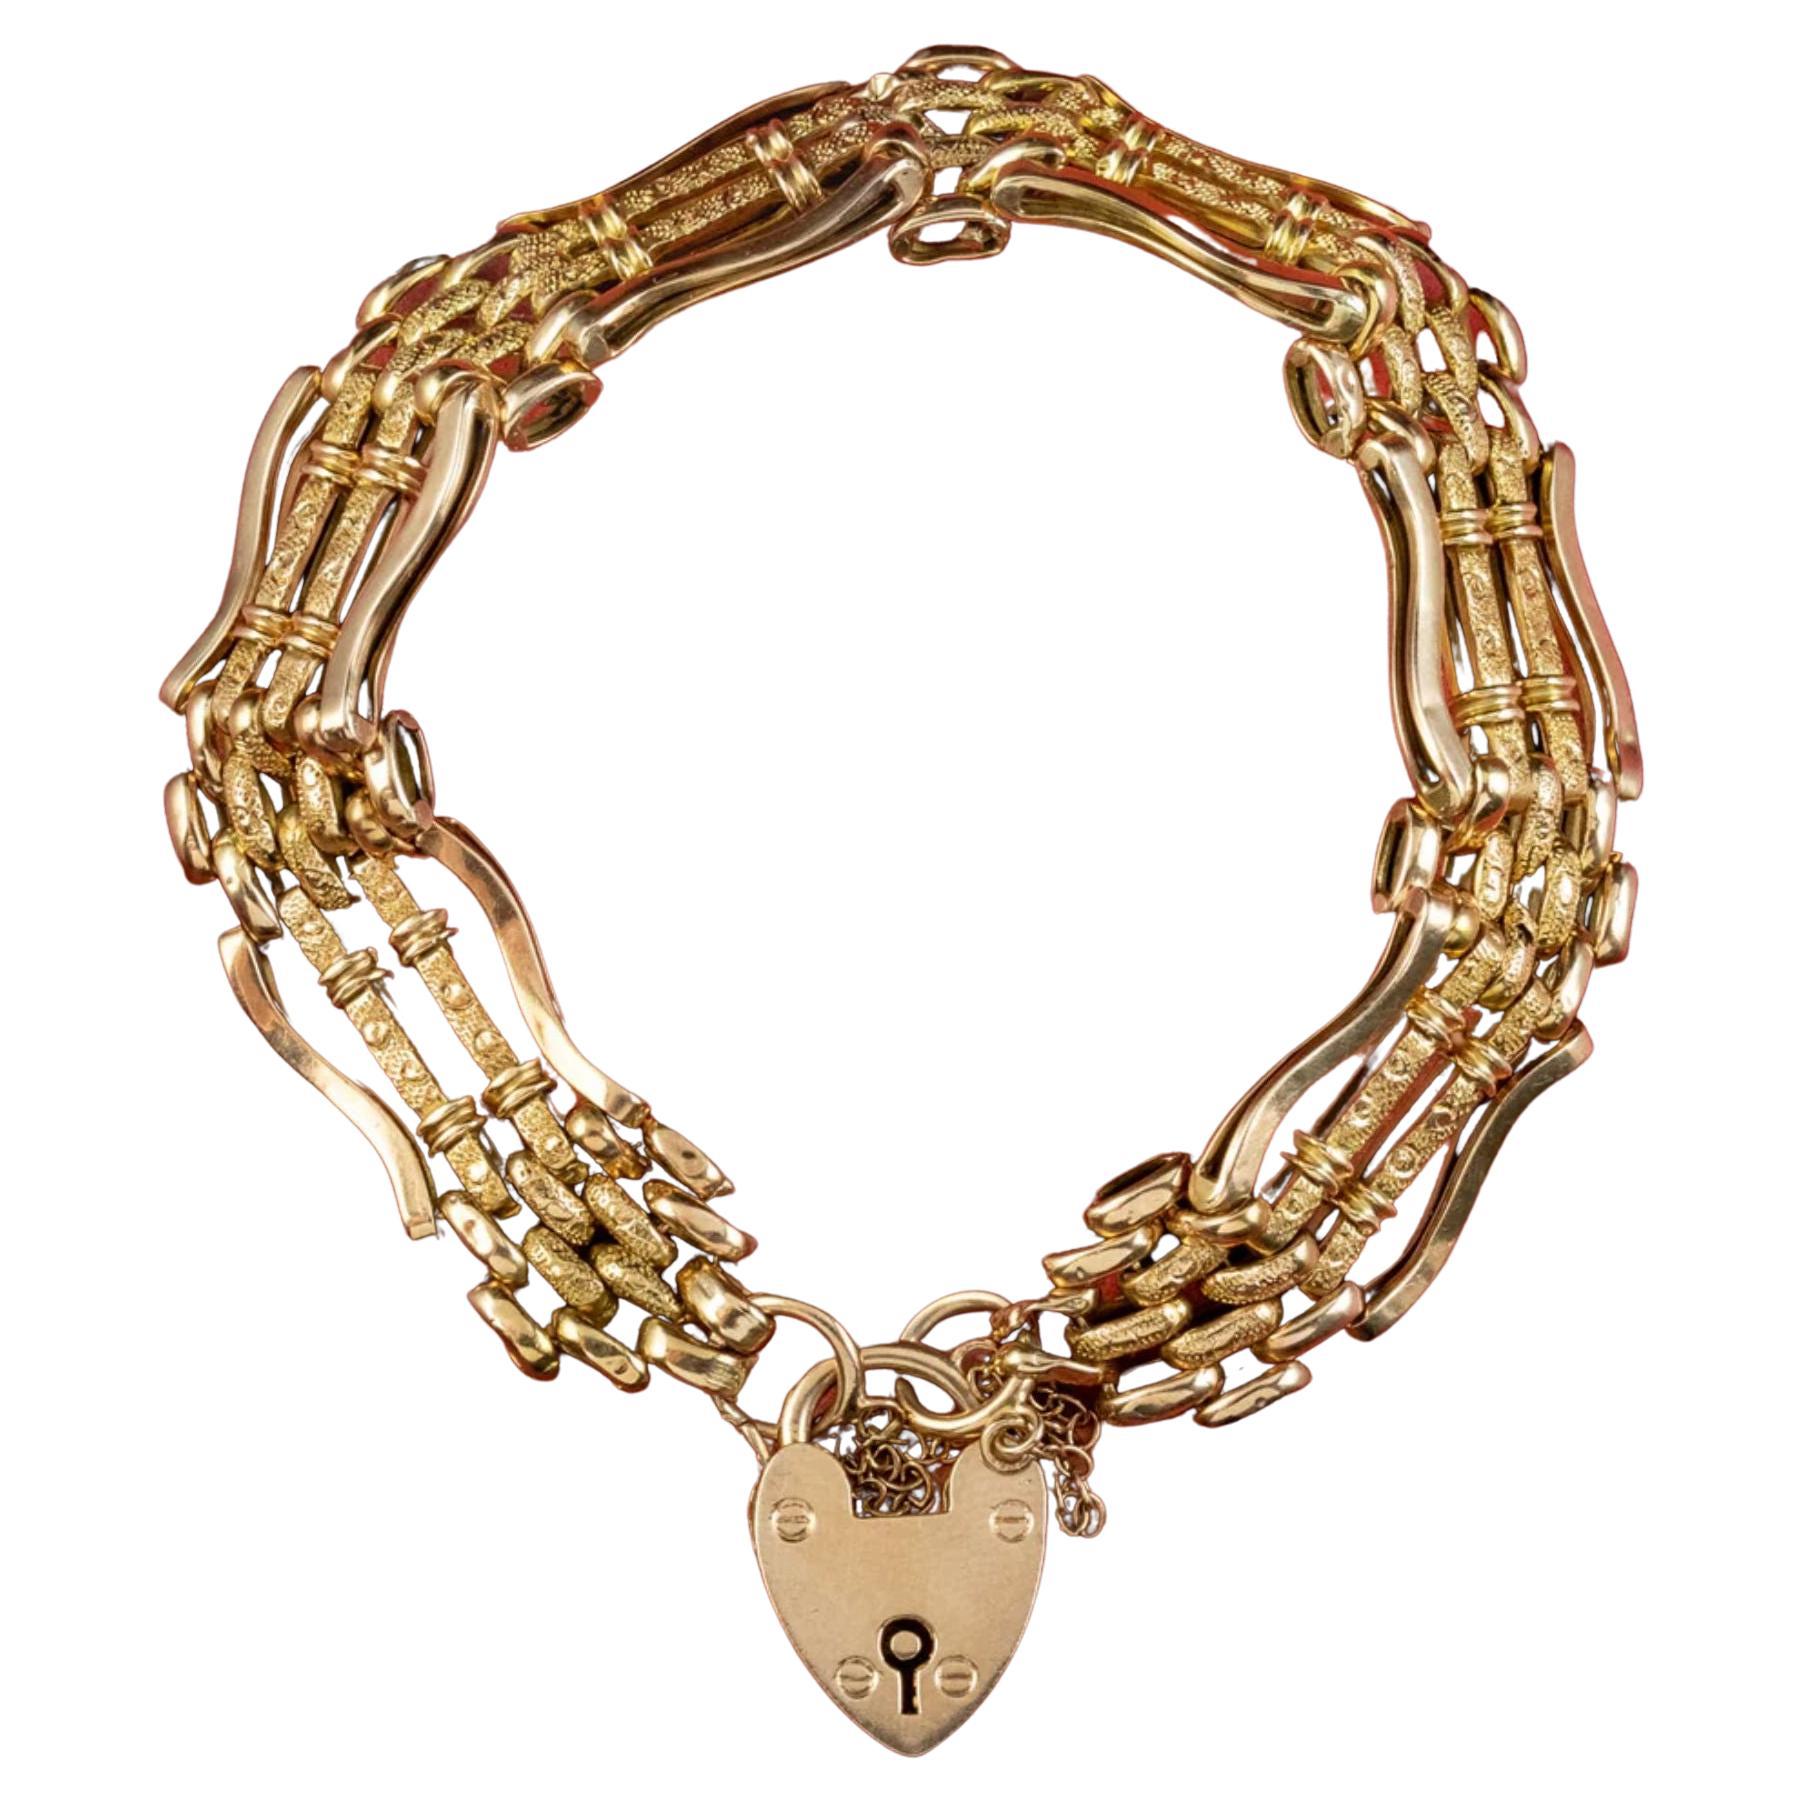 Antique Victorian Gate Bracelet in 9 Carat Gold with Heart Padlock, circa 1900